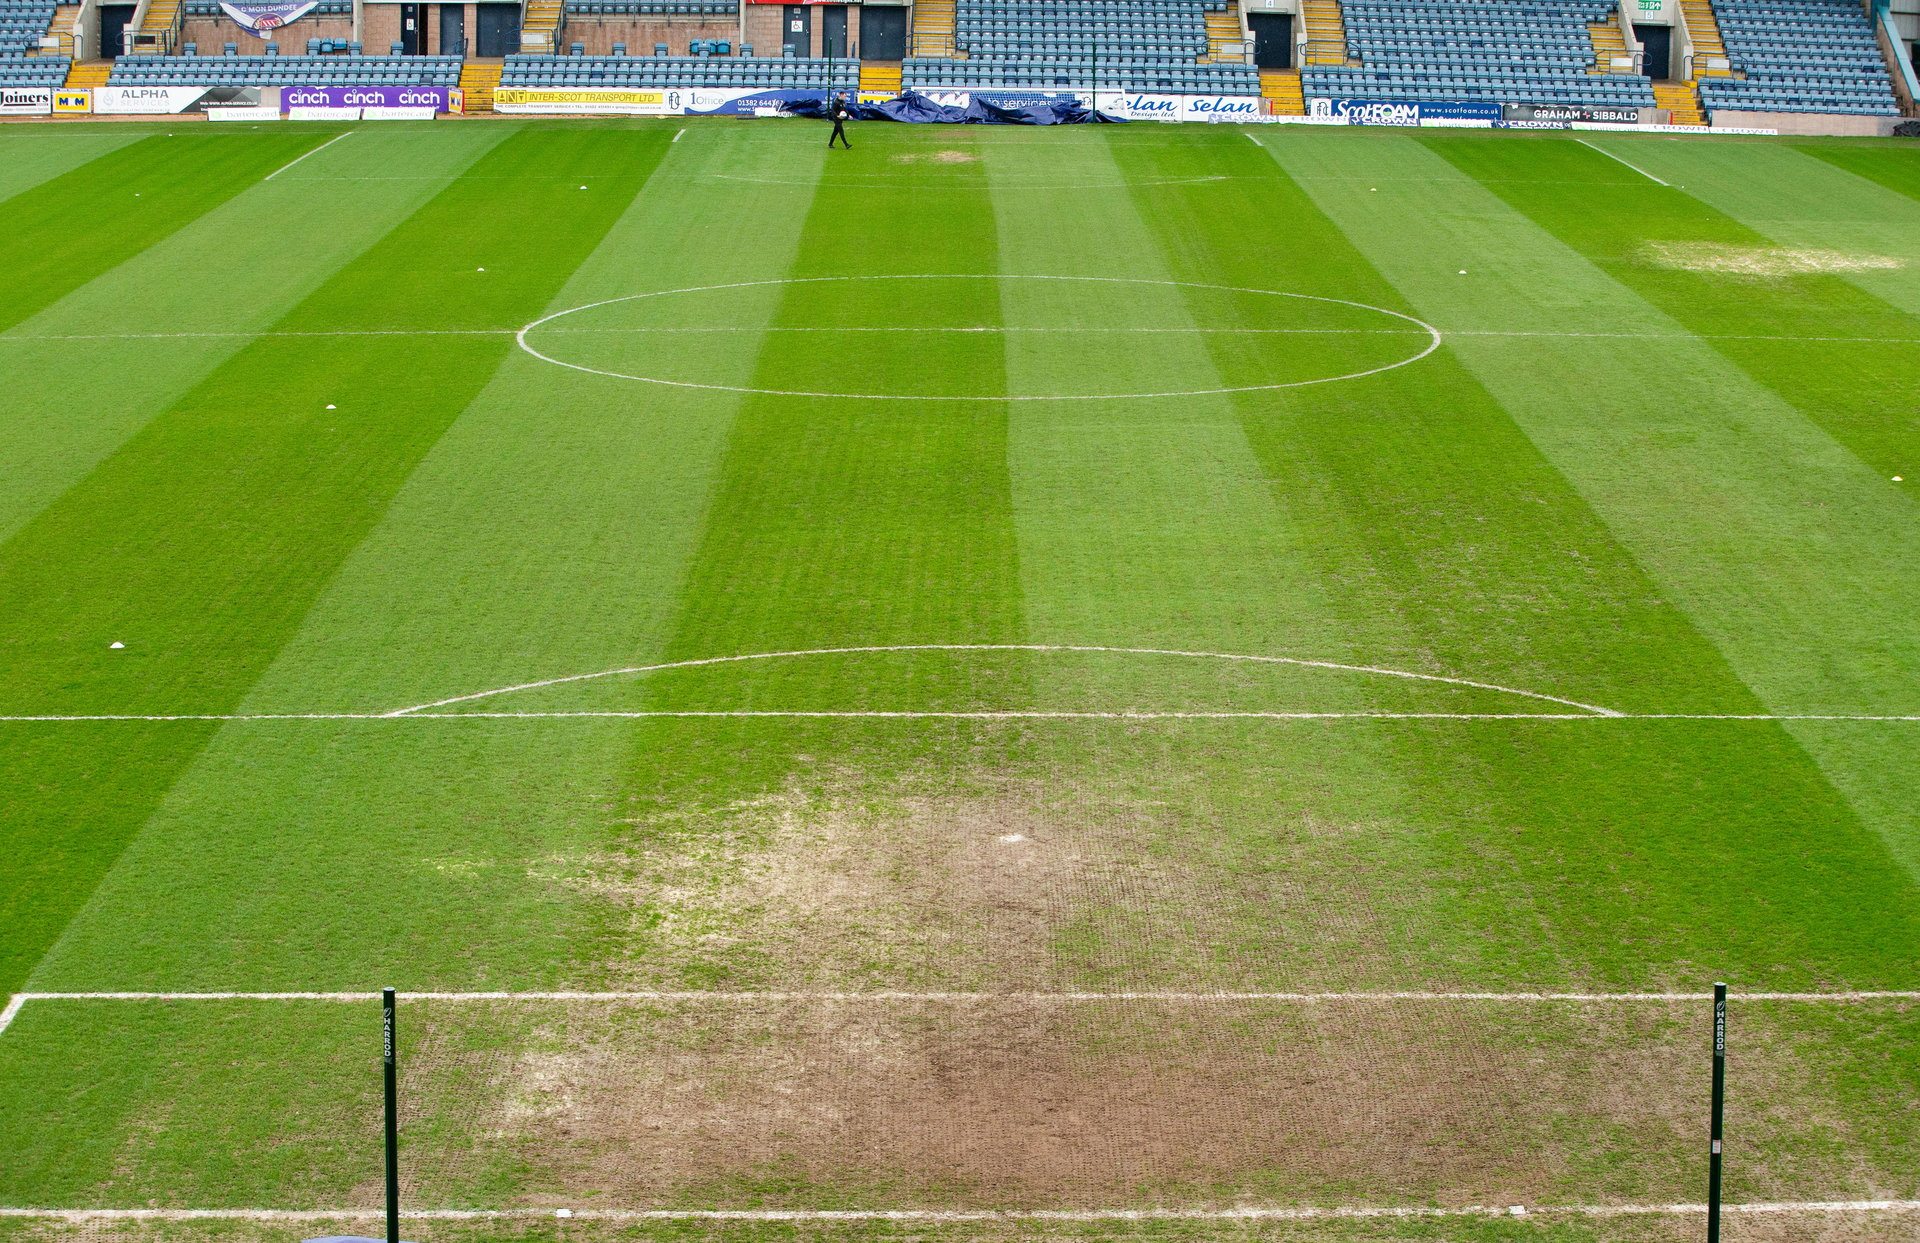 Pitch inspection ahead of a cinch Premiership match between Dundee and Rangers at the Scot Foam Stadium at Dens Park.